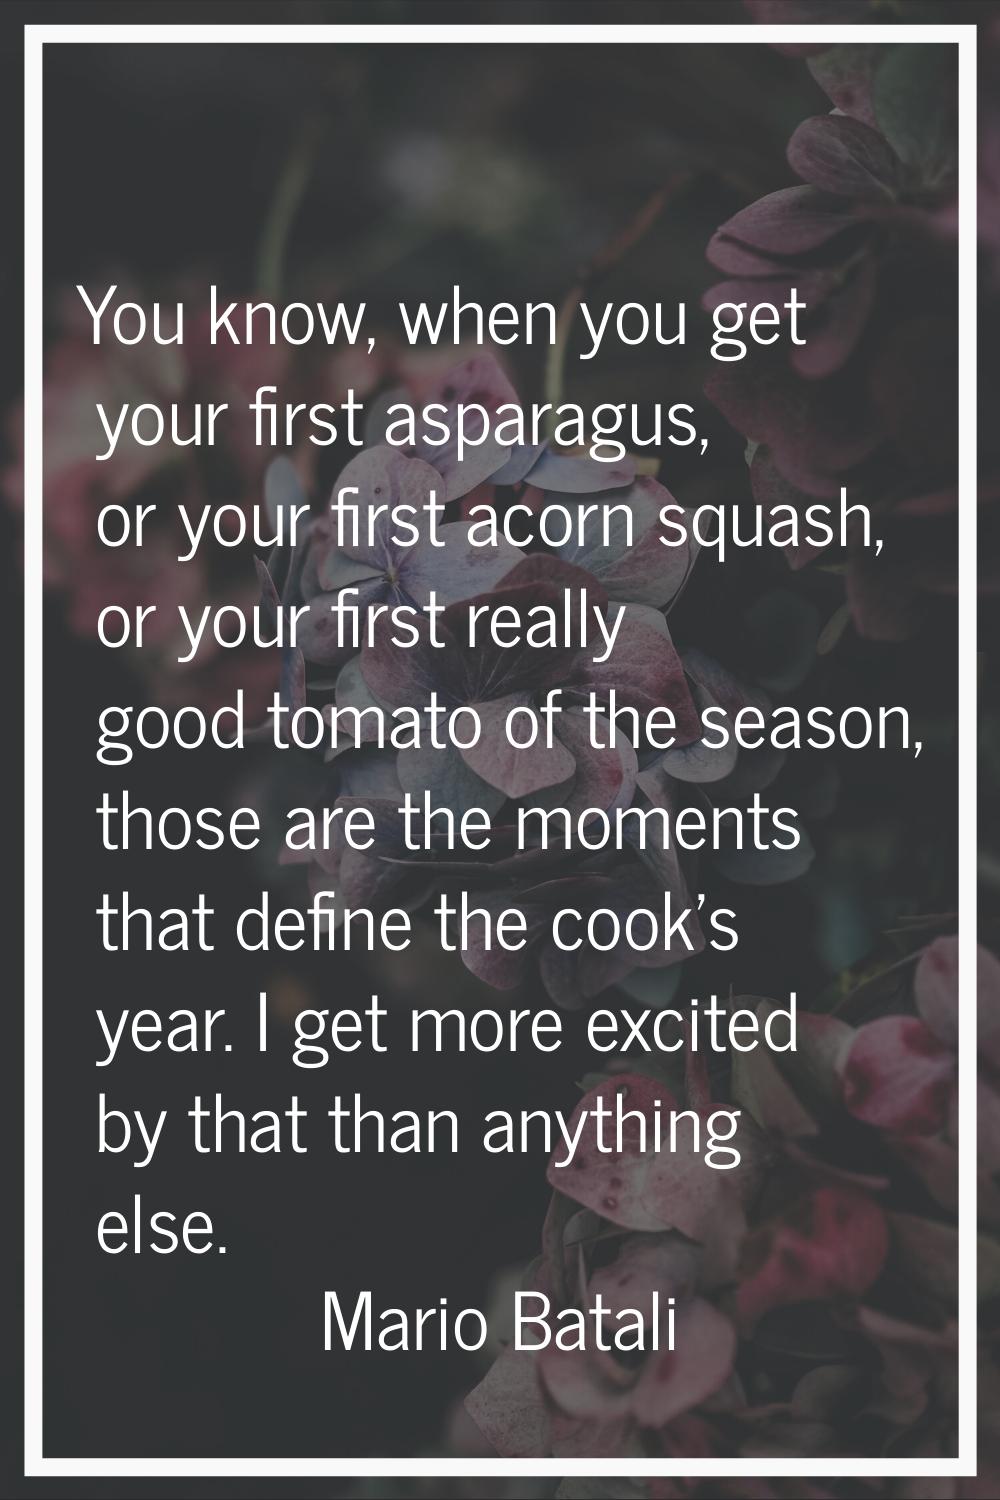 You know, when you get your first asparagus, or your first acorn squash, or your first really good 